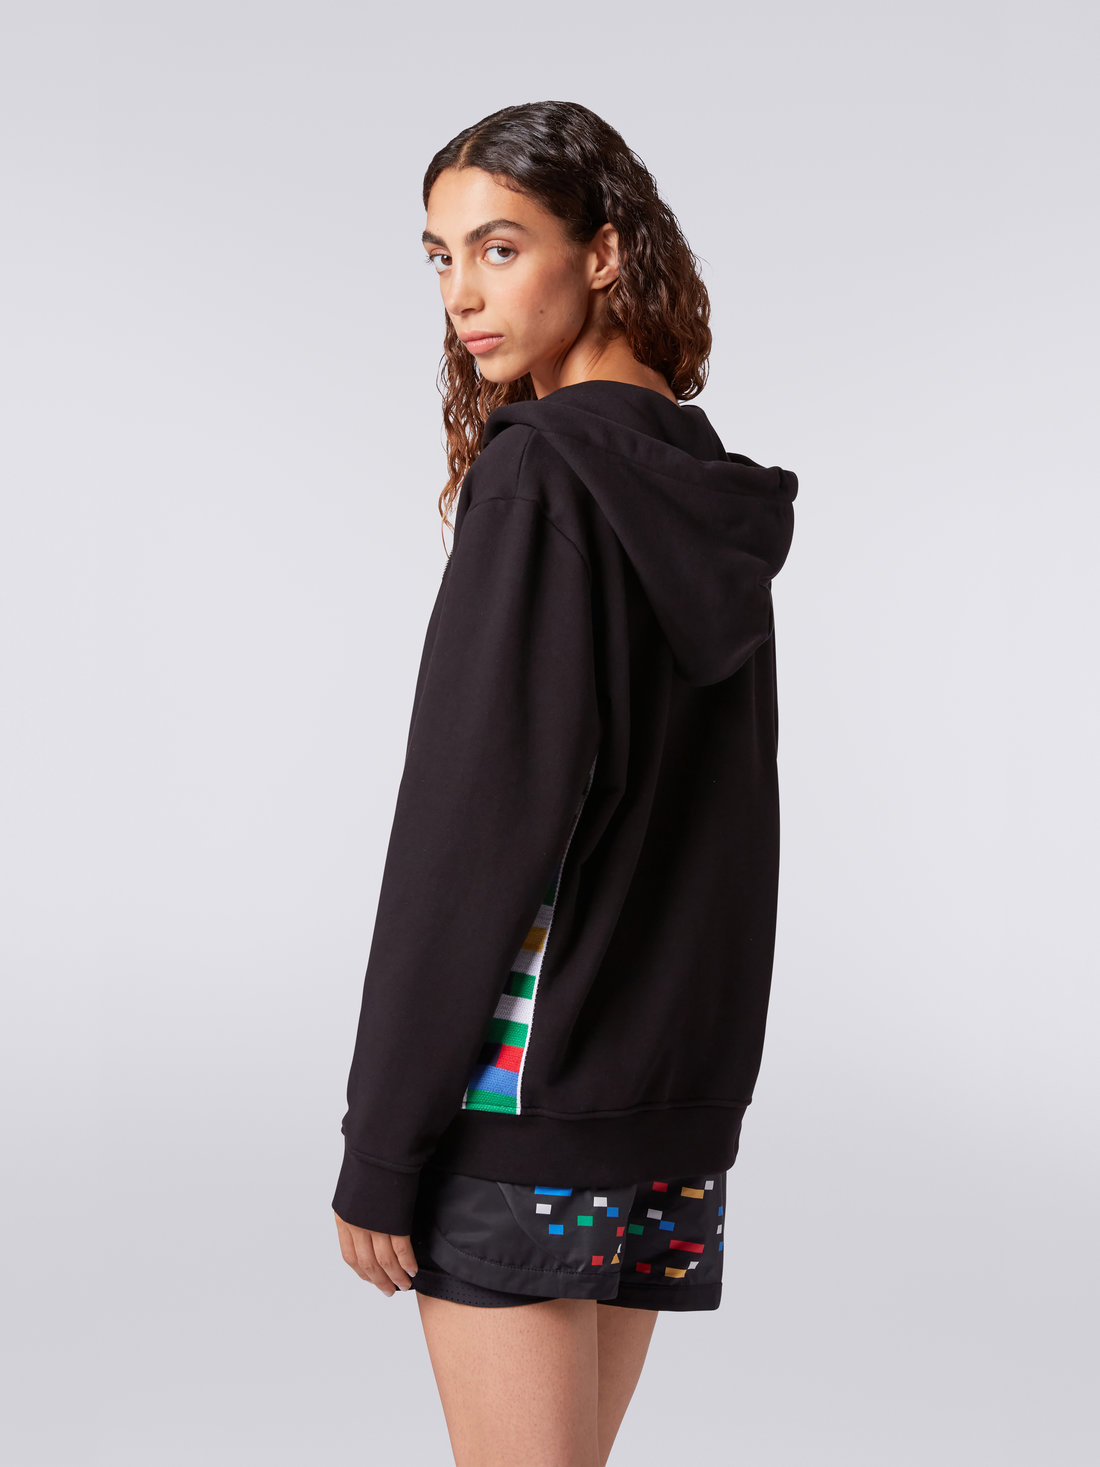 Full-zip hooded sweatshirt with knitted bands, Black & Multicoloured  - 3